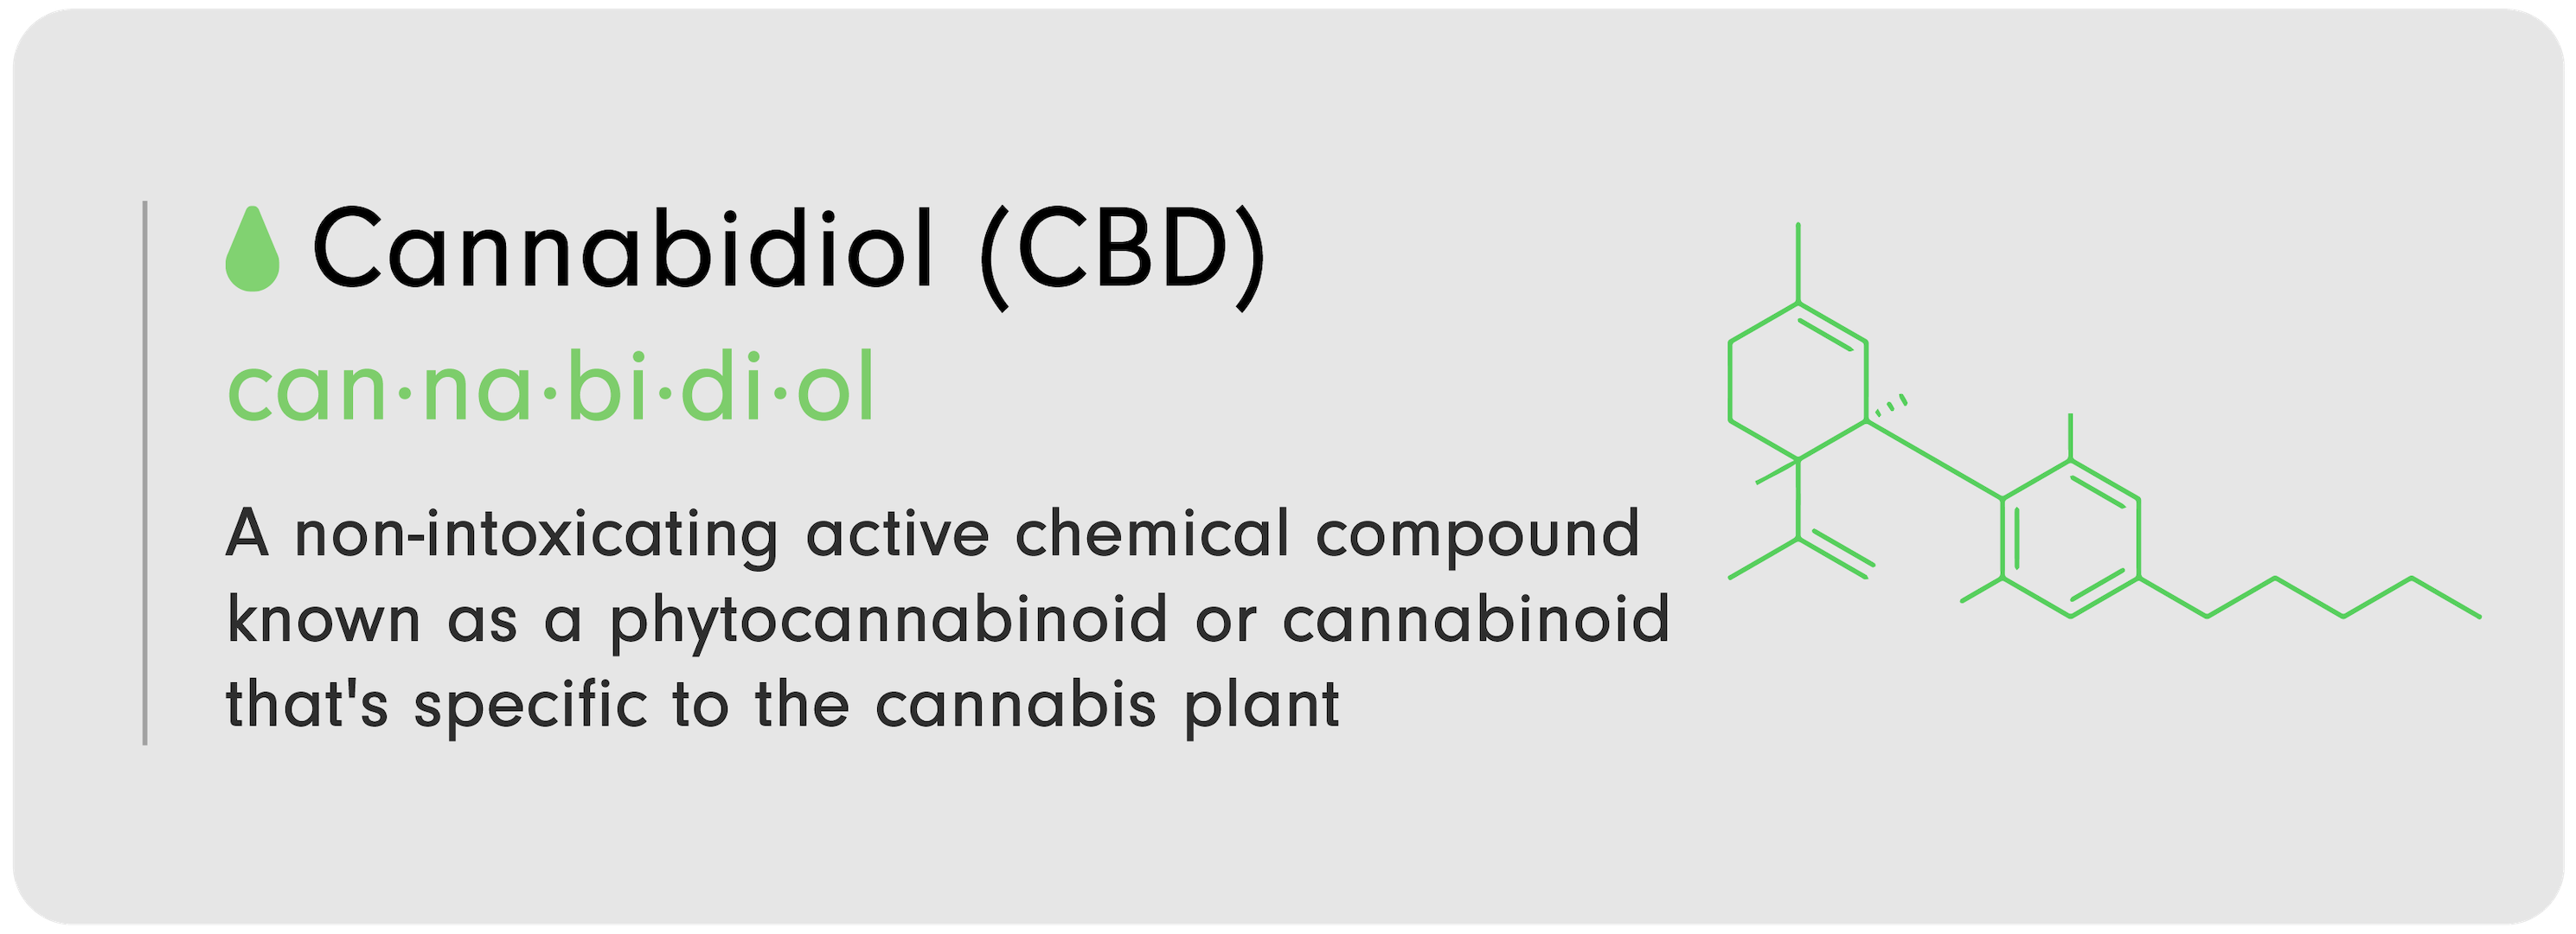 CBD 101 infographic that reads, "C----binoid (CBD): A non-intoxicating active chemical compound known as a phytoc----binoid or cannabinoid that's specific to the c----bis plant."